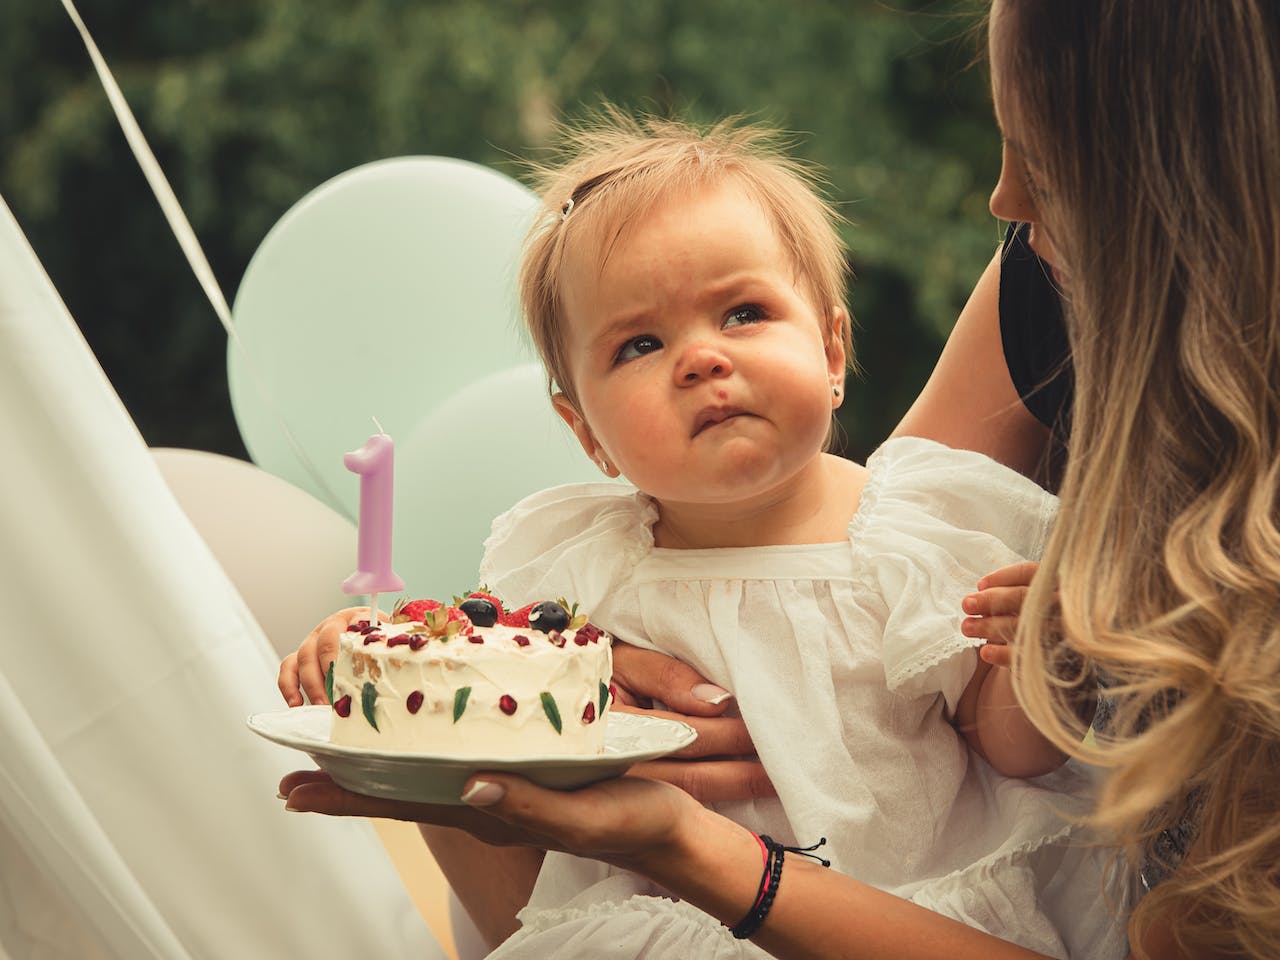 Child Frowning at a Plate with Cake